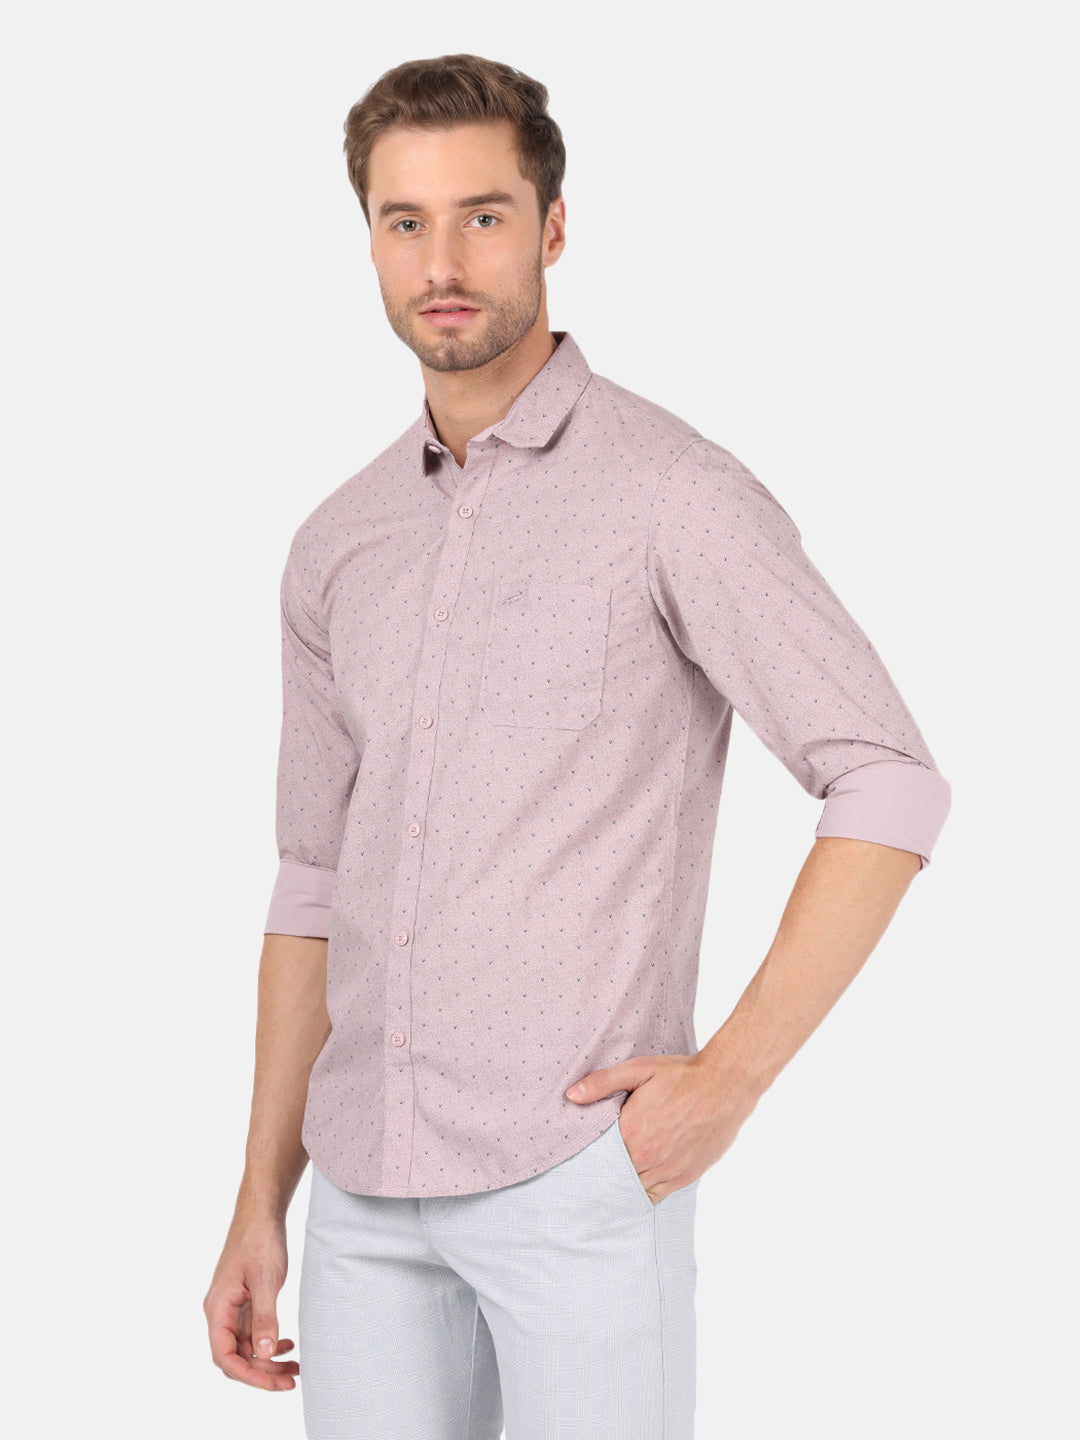 Crocodile Casual Full Sleeve Slim Fit Printed Light Light Purple with Collar Shirt for Men